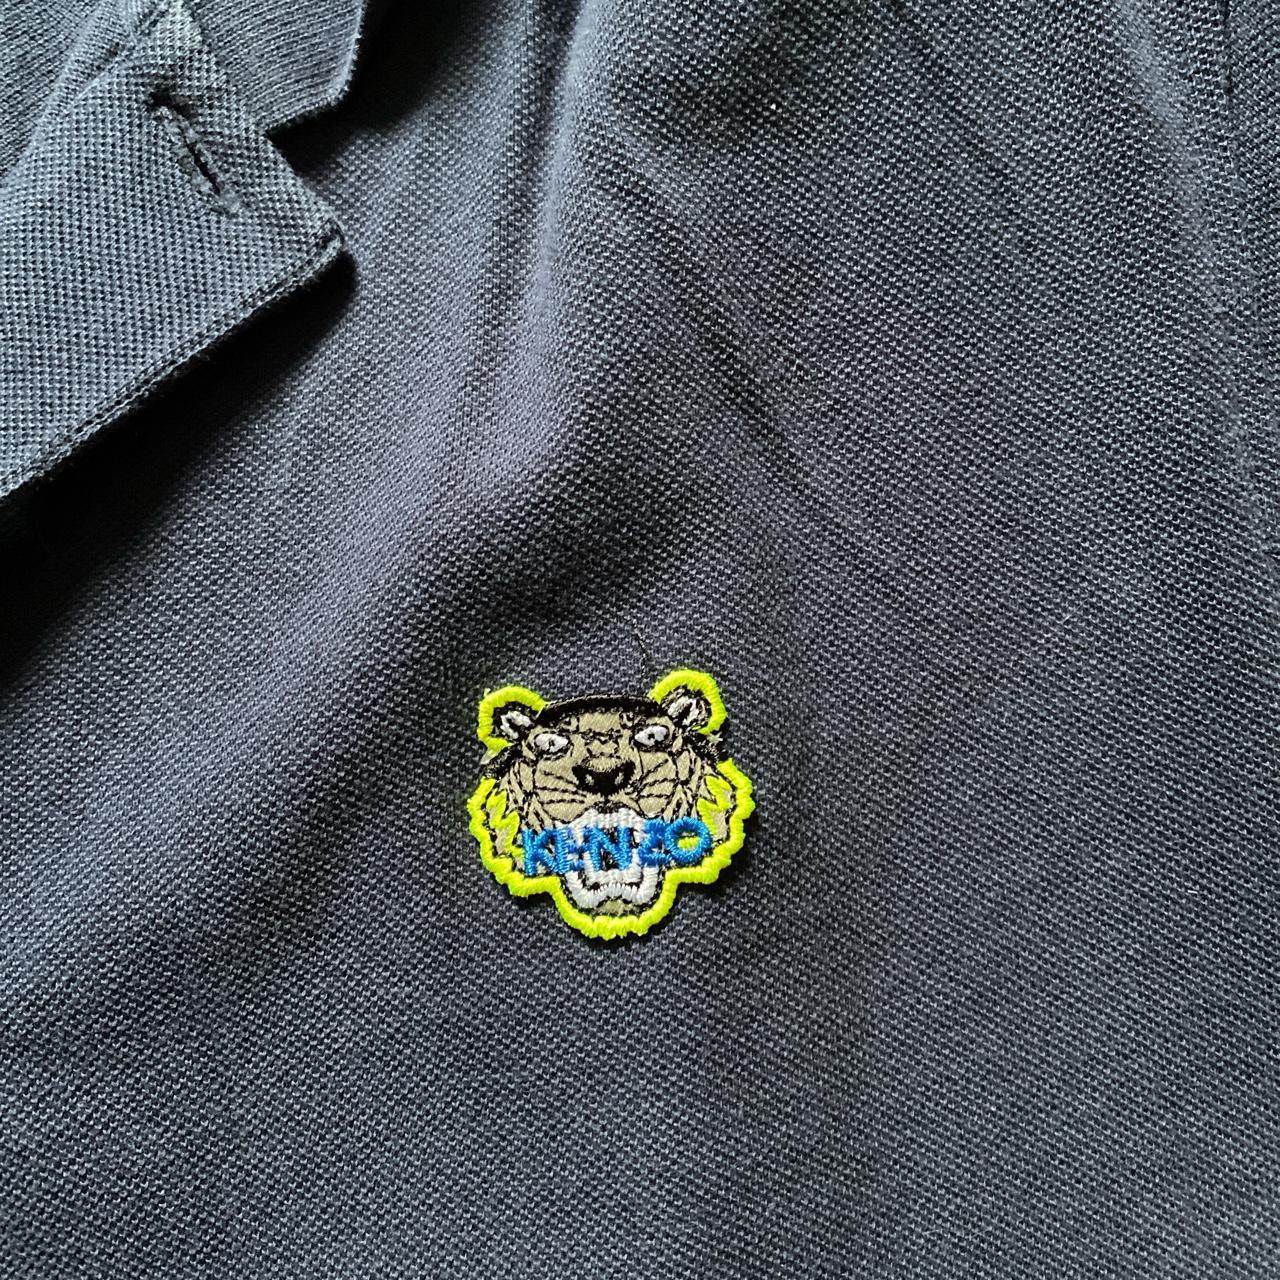 Kenzo polo shirt Message any questions. - Depop